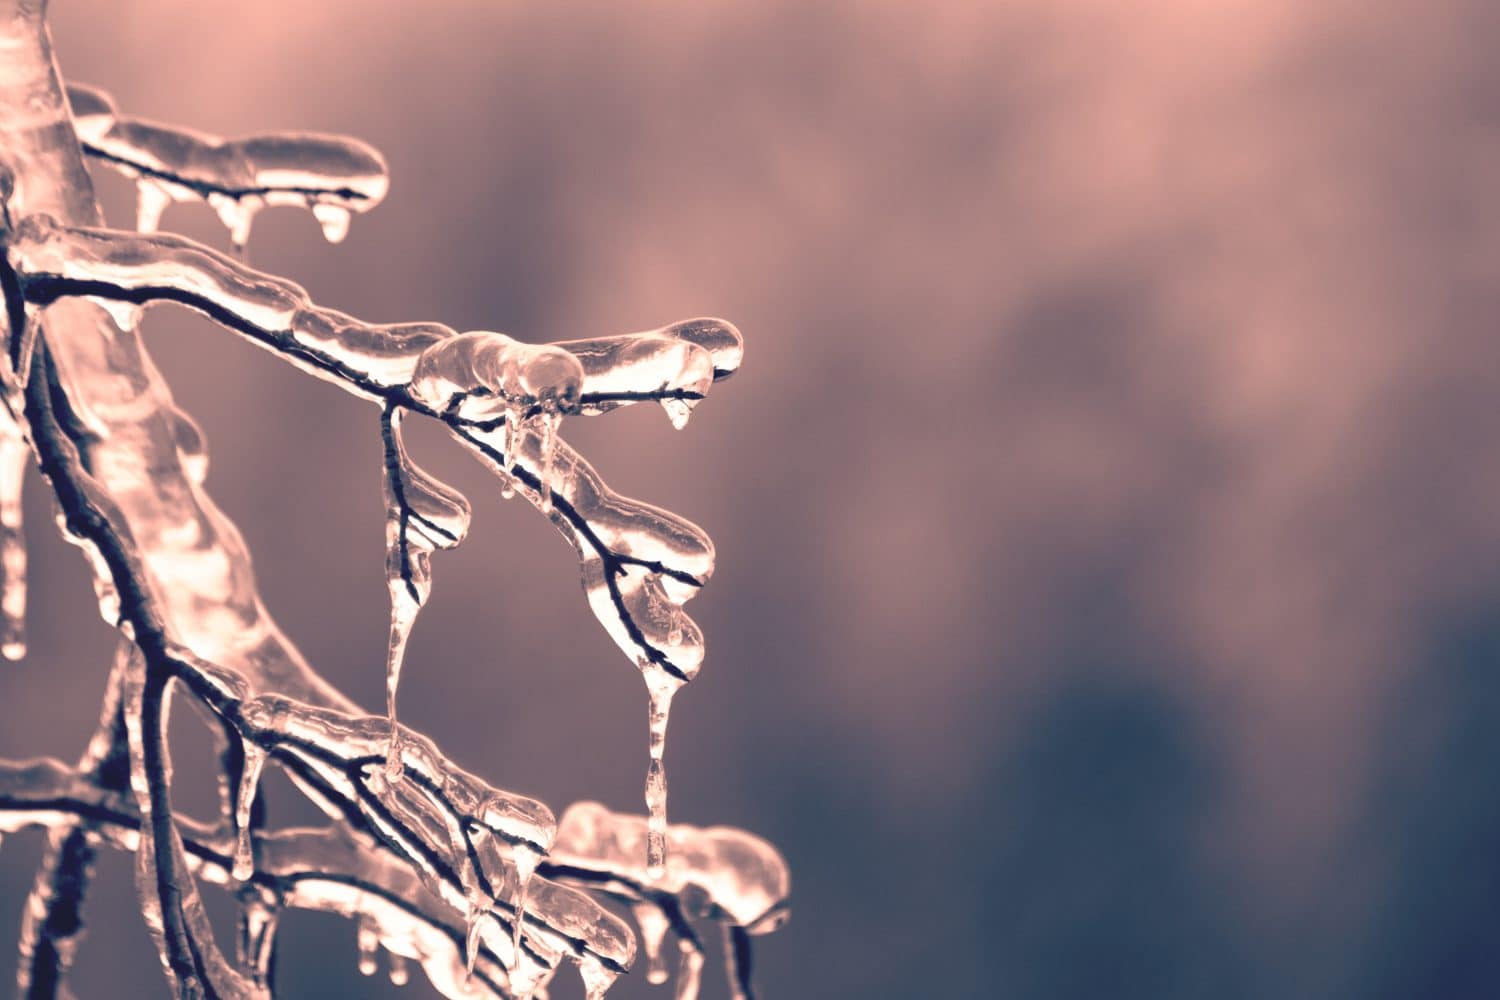 Are You Ready for Texas Ice Storms? Avoid a Crash With These Tips